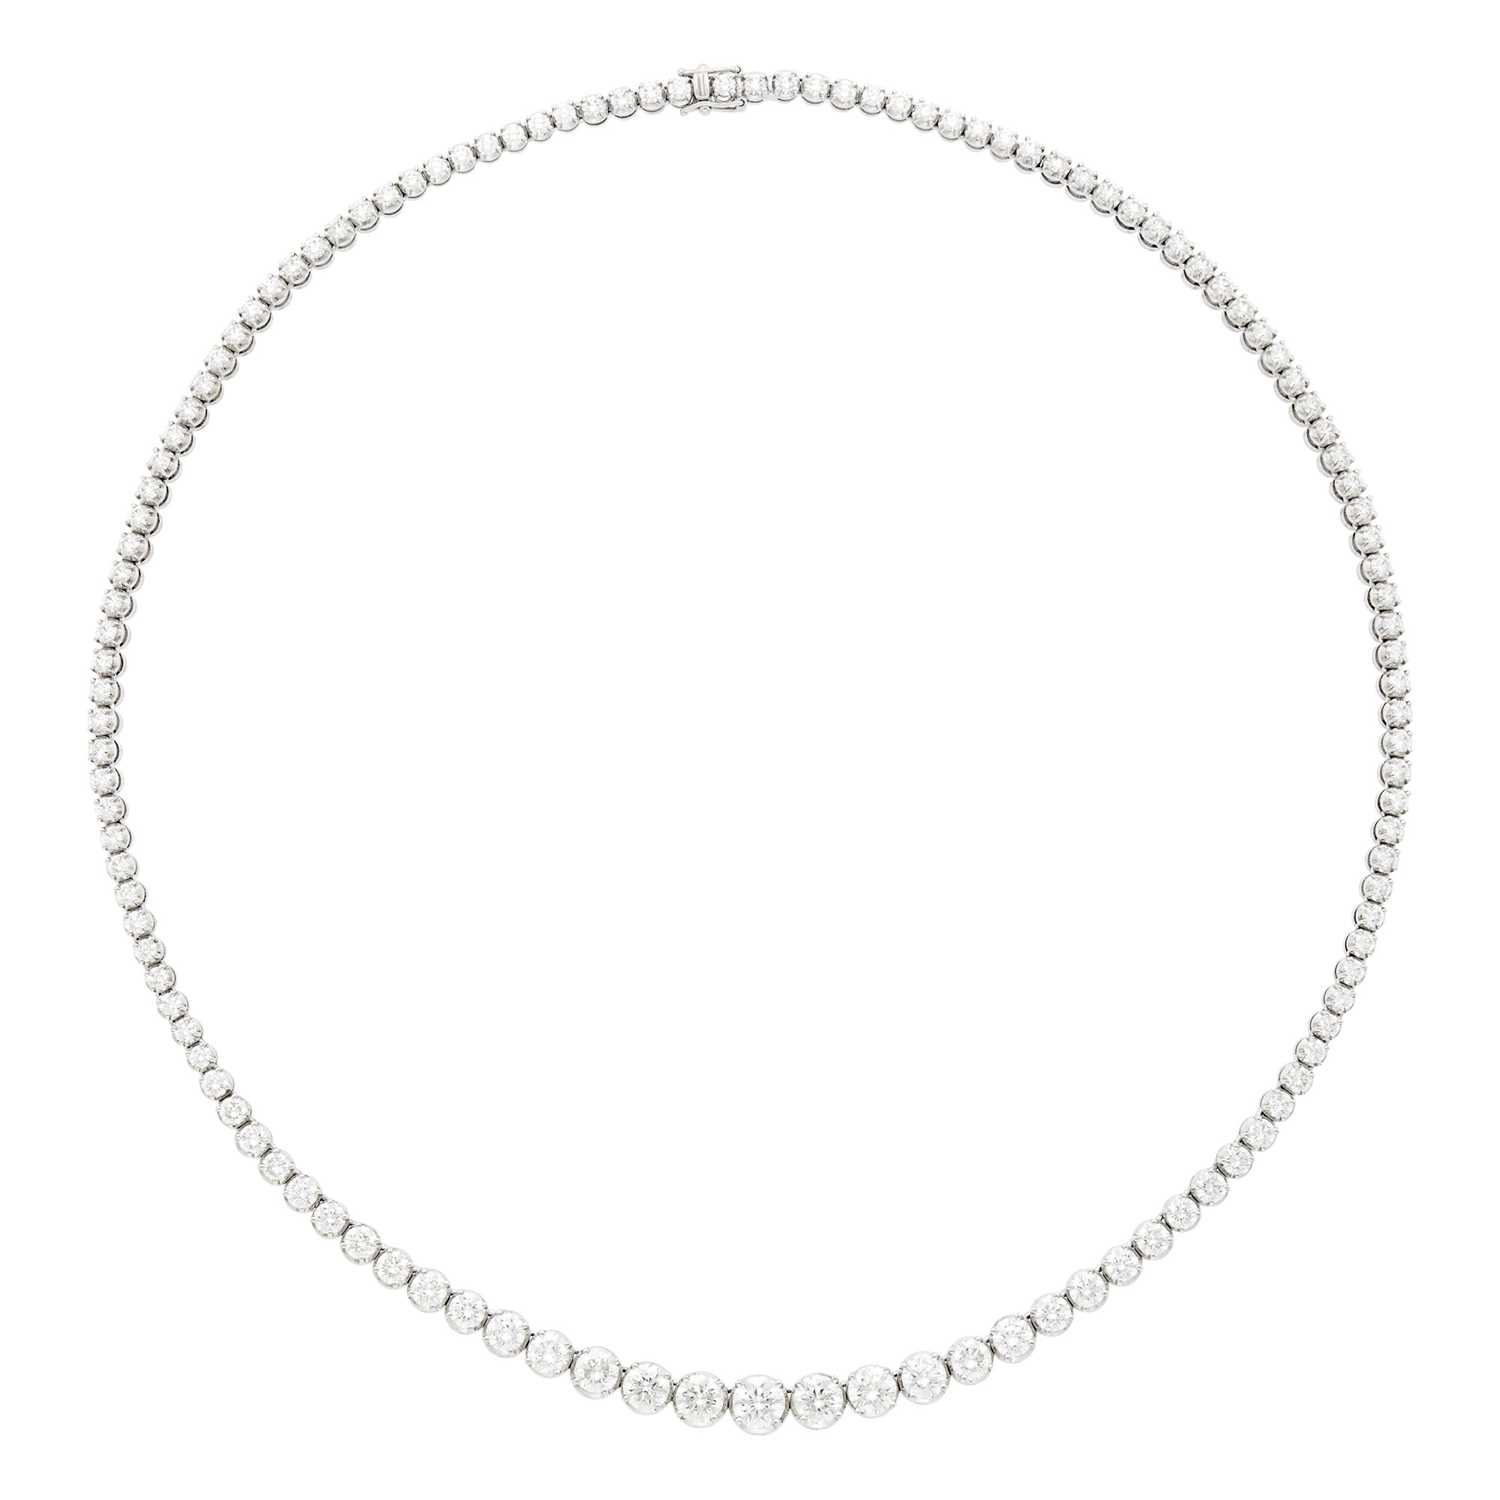 Lot 152 - White Gold and Diamond Necklace